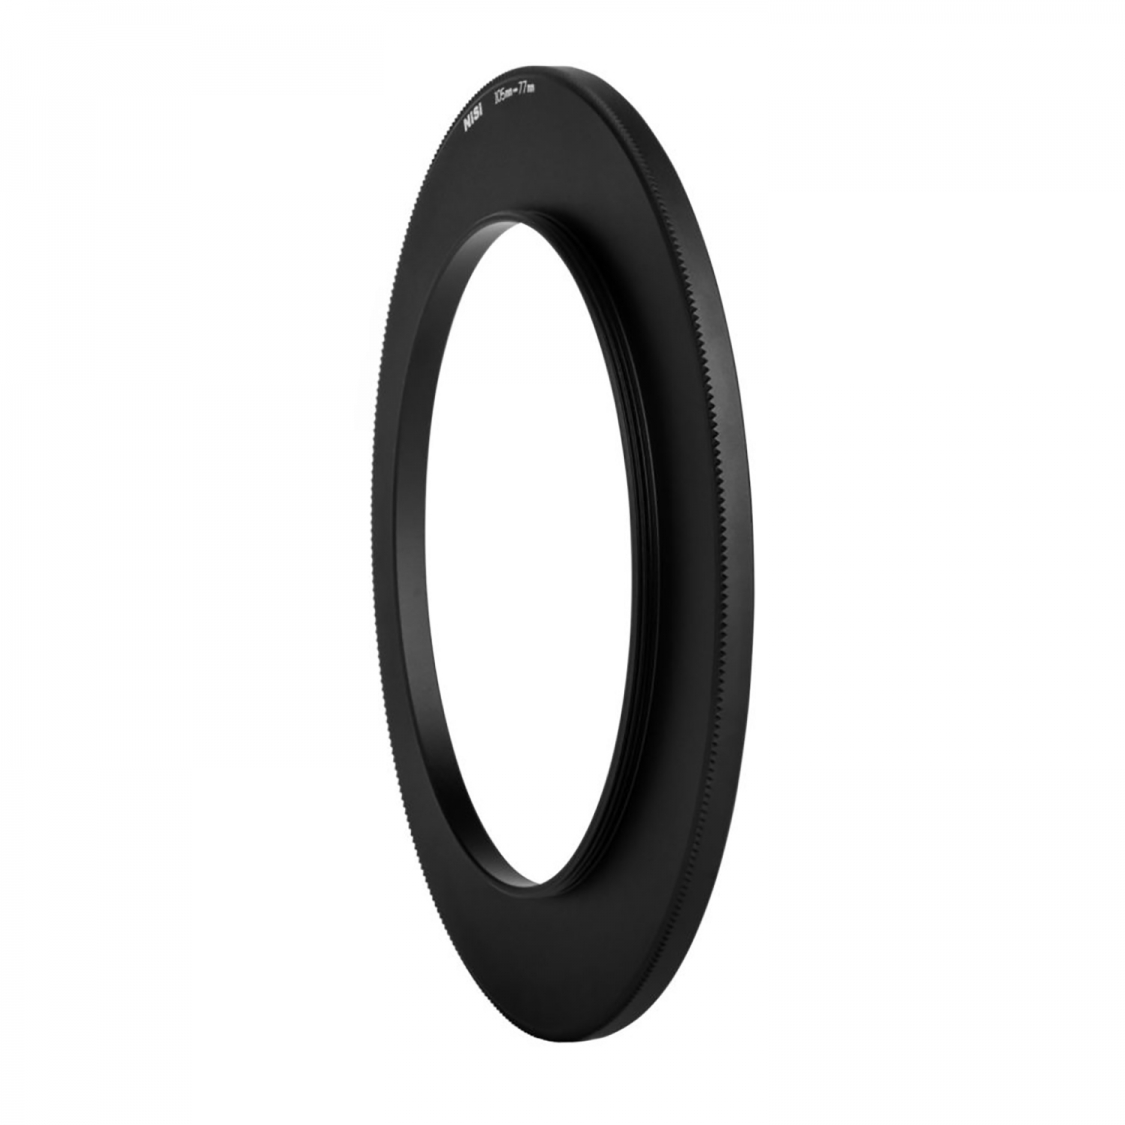 NiSi 77-105mm Adaptor for S5 for Standard Filter Threads